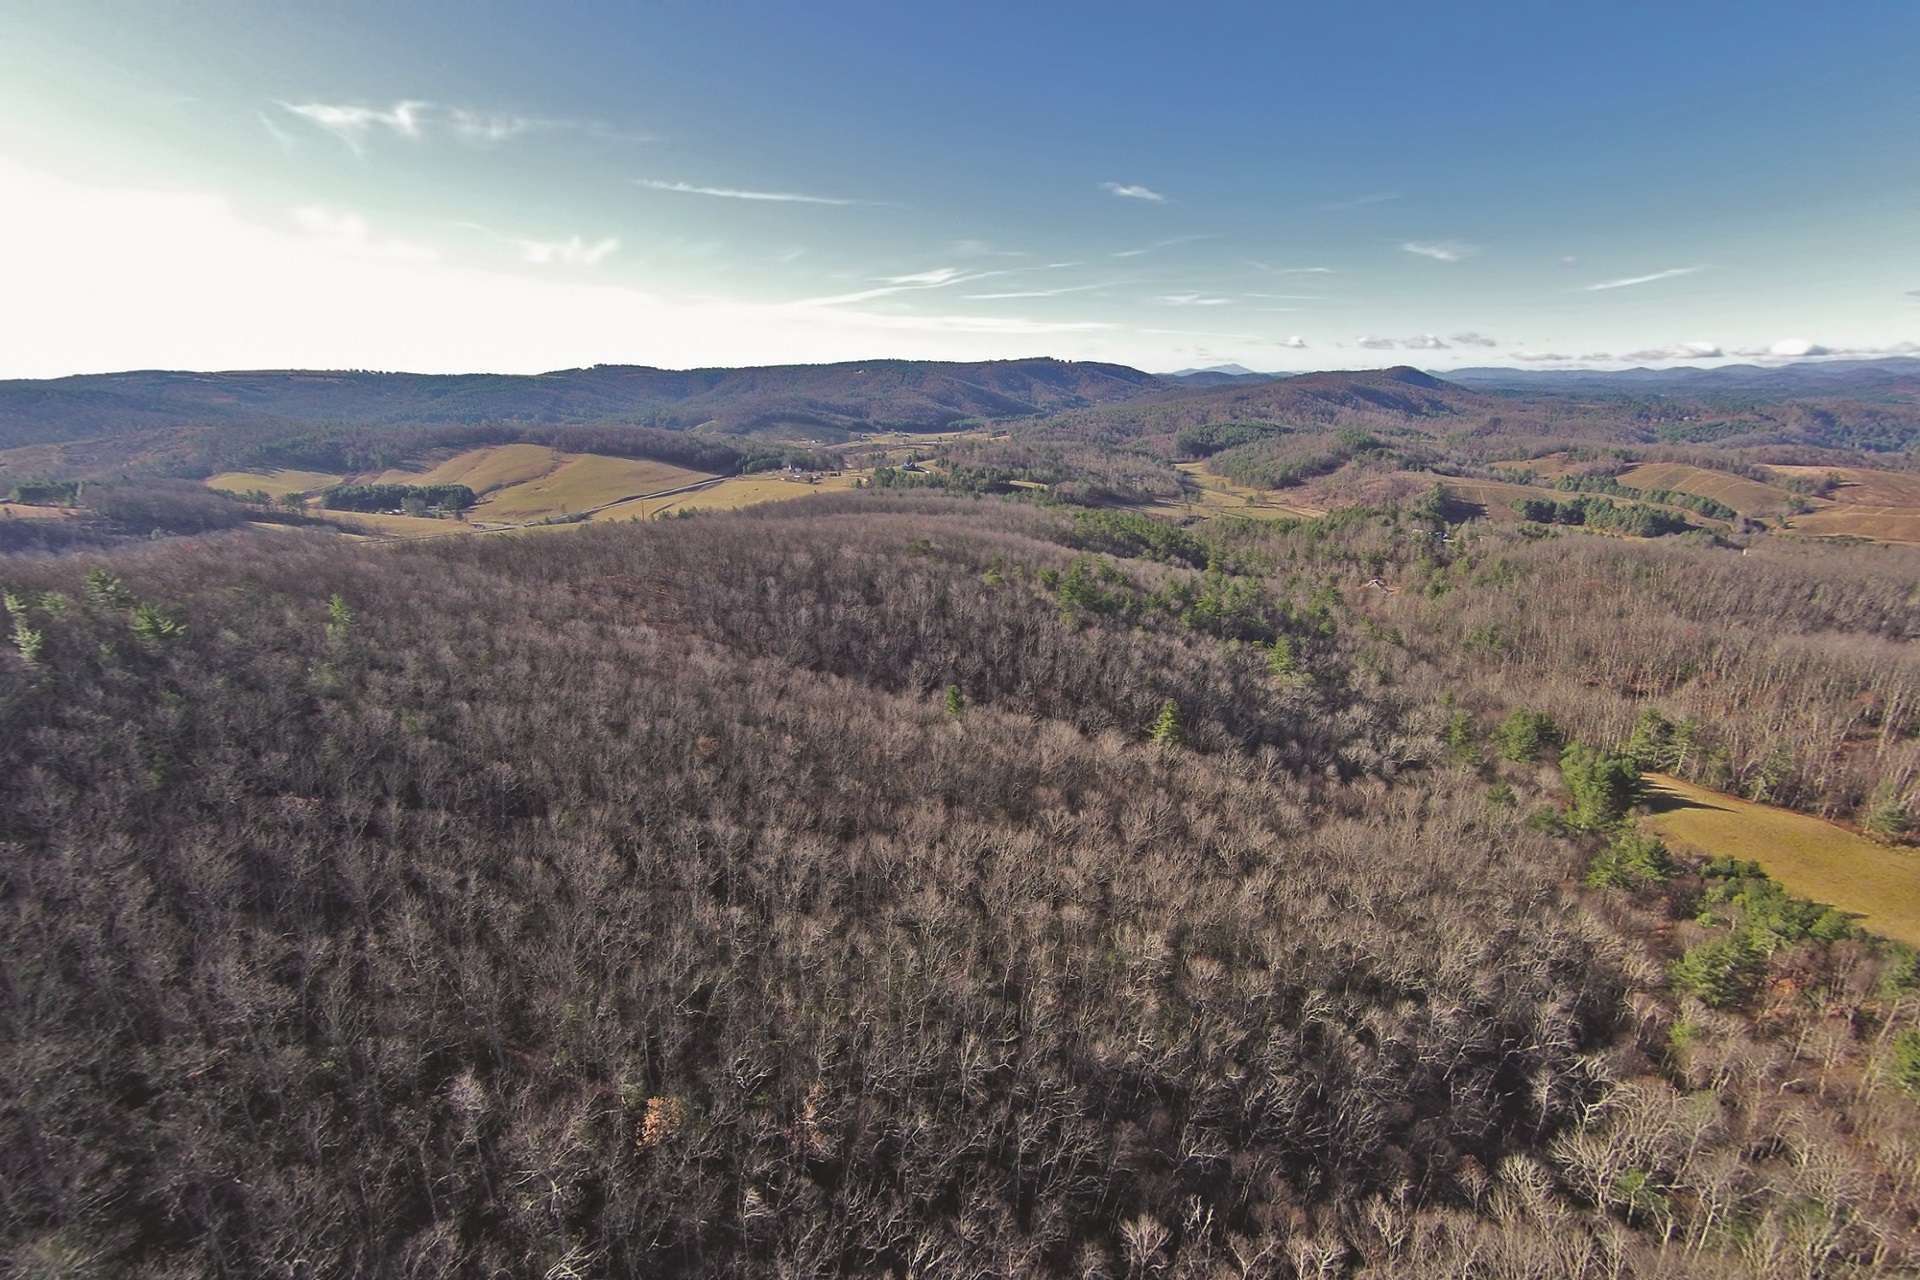 This photo is a drone shot provided by the seller of the views from the highest point of the property.